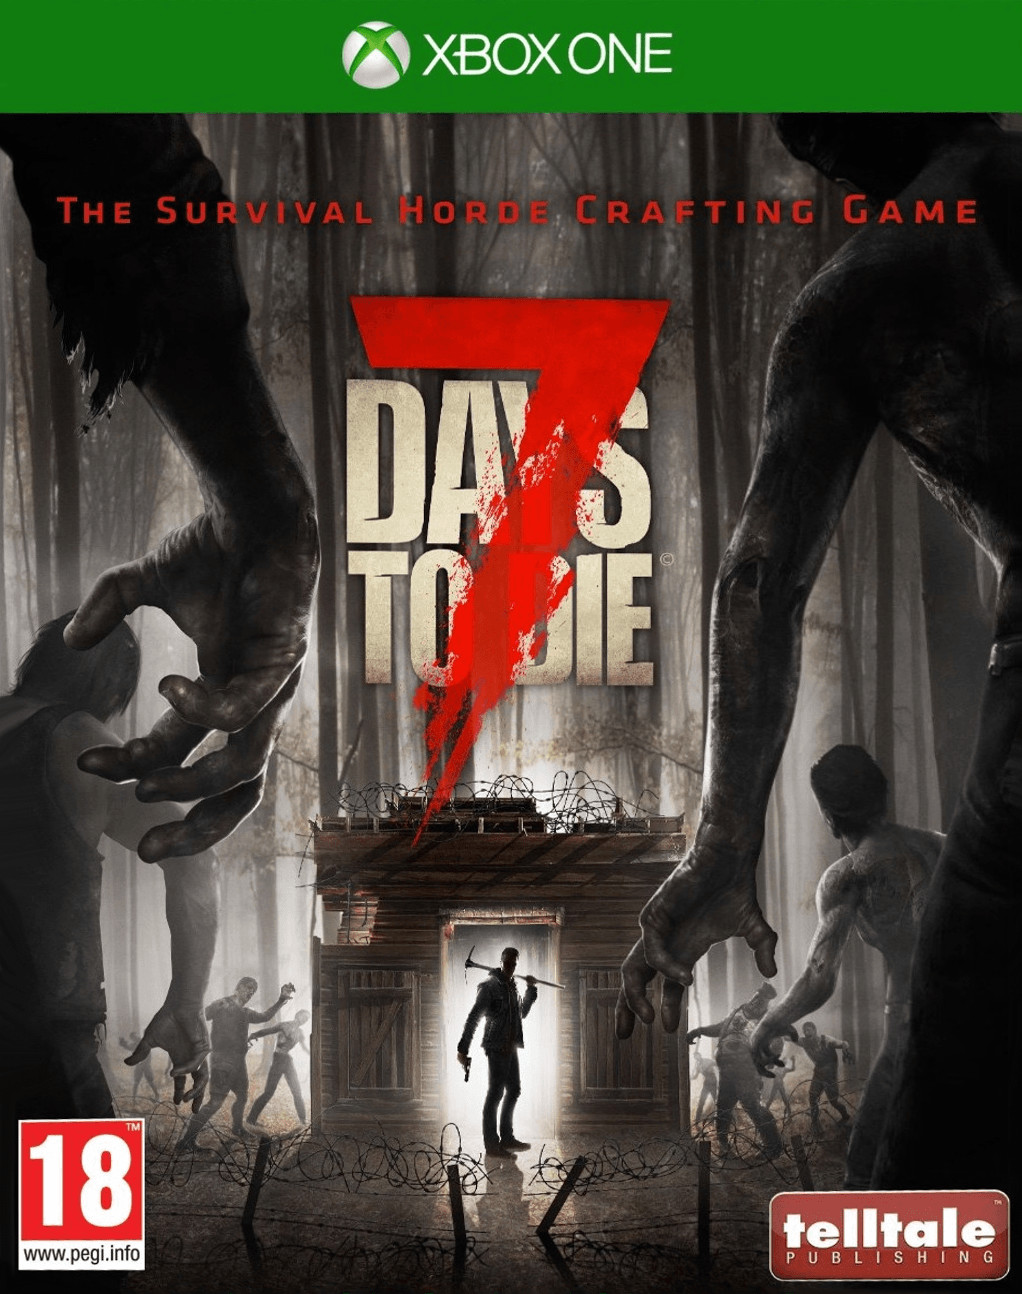 Buy 7 Days to Die (Xbox One) from £37.43 (Today) – Best Deals on idealo